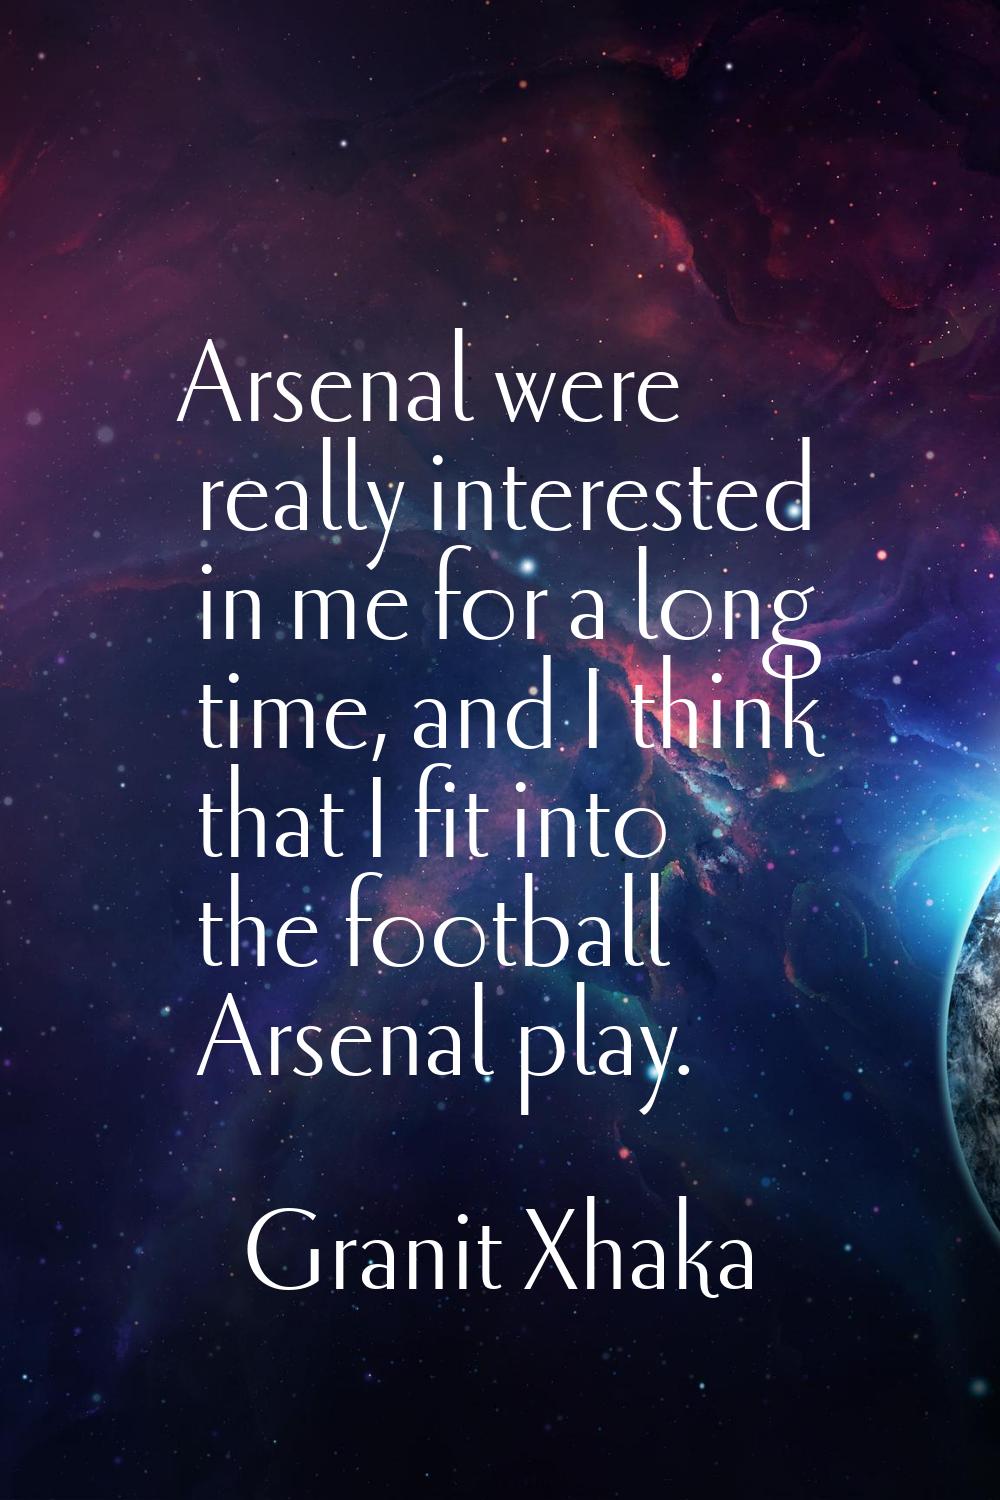 Arsenal were really interested in me for a long time, and I think that I fit into the football Arse